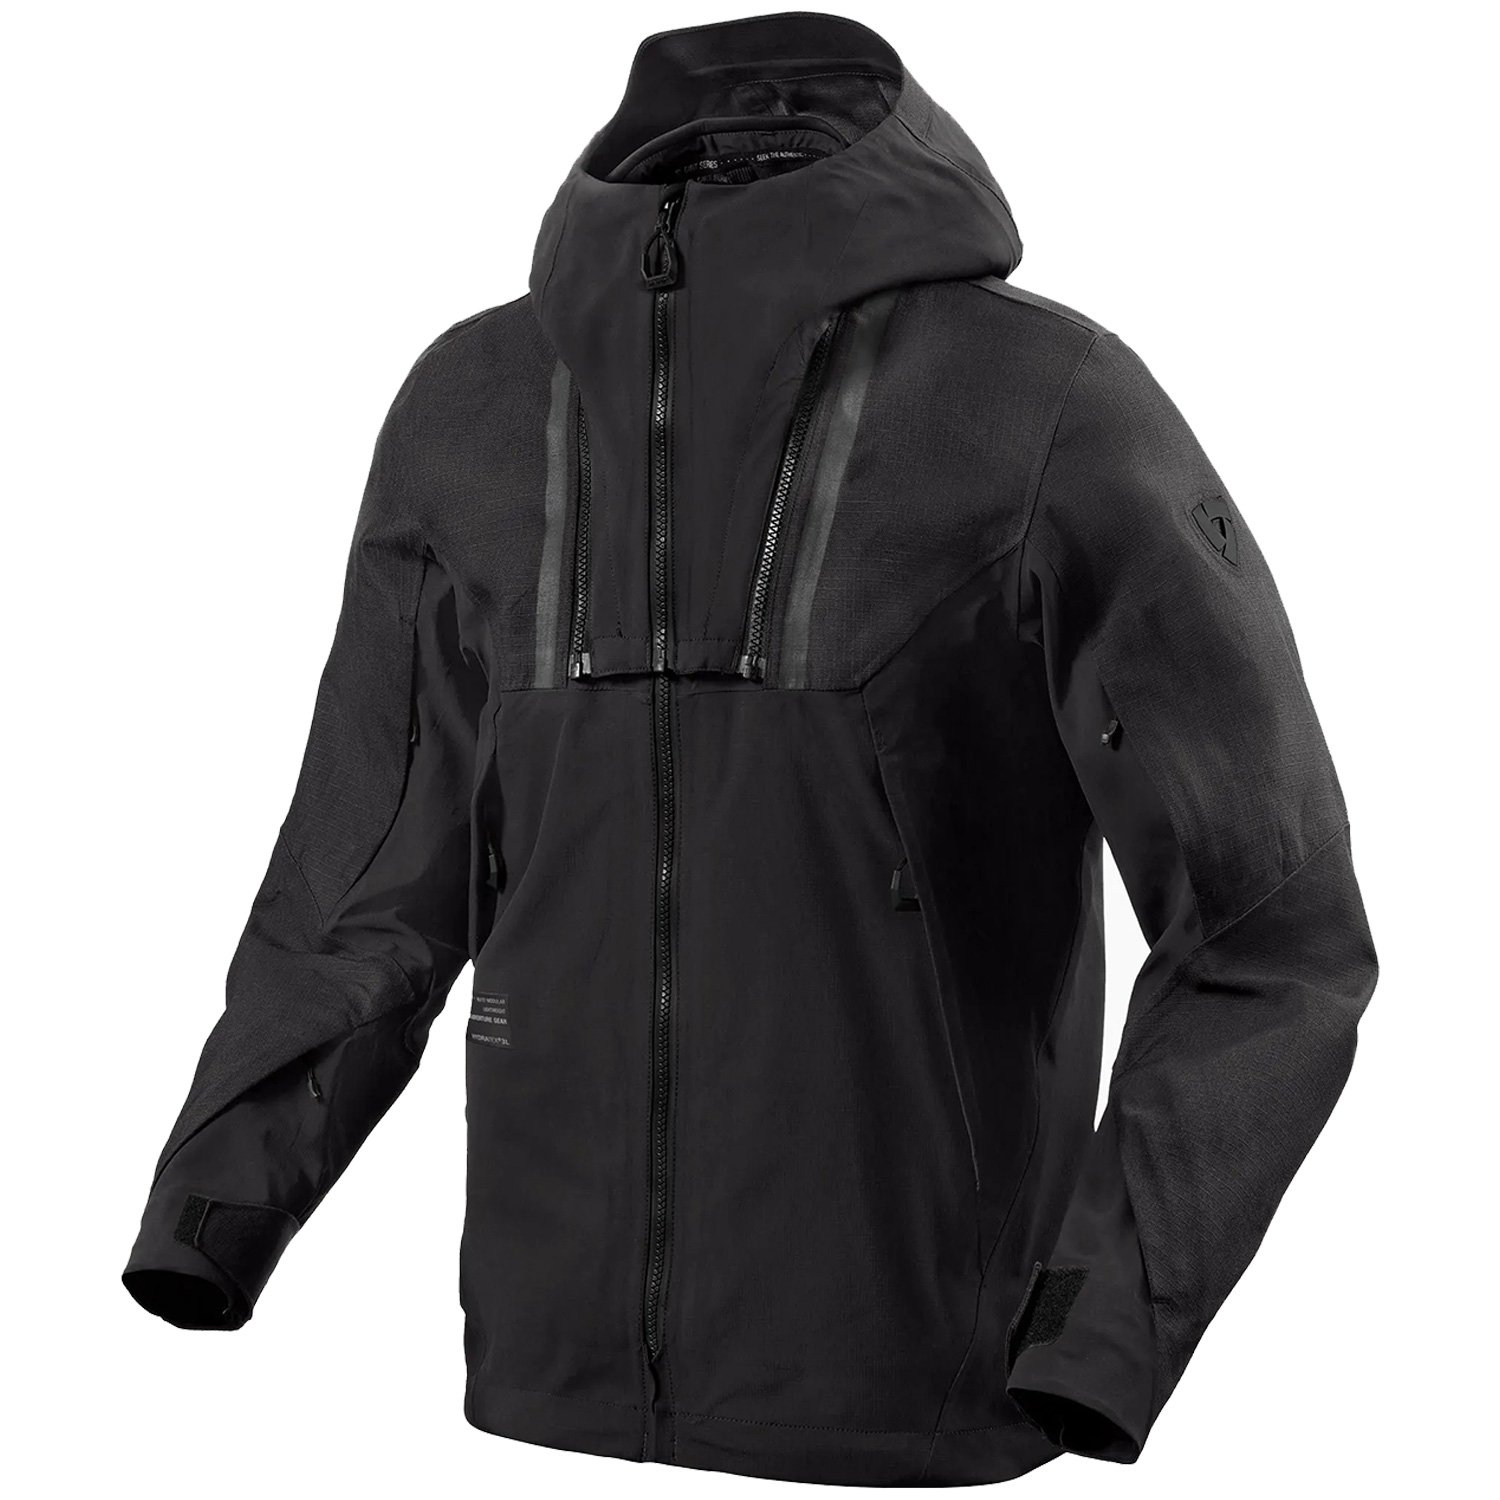 Image of REV'IT! Component 2 H2O Jacket Black Size M ID 8700001370646